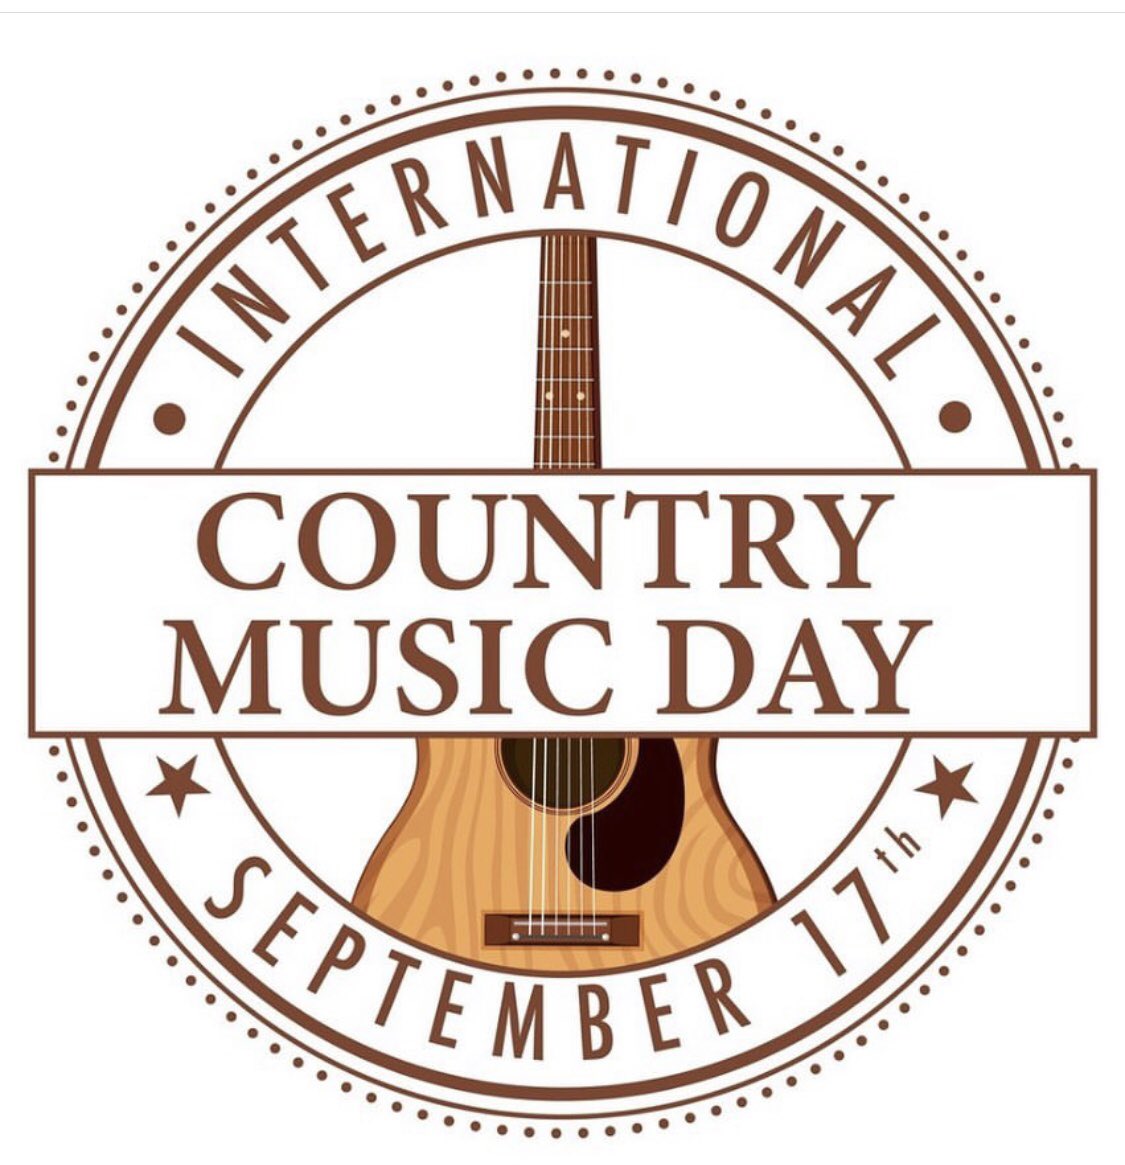 Country Music the music of stories, catchy melody and soul… enjoy the day Country Music fans everywhere. We love writing and performing country Warwick & Young Adrian Warwick Lyricist warwickandyoung.co.uk